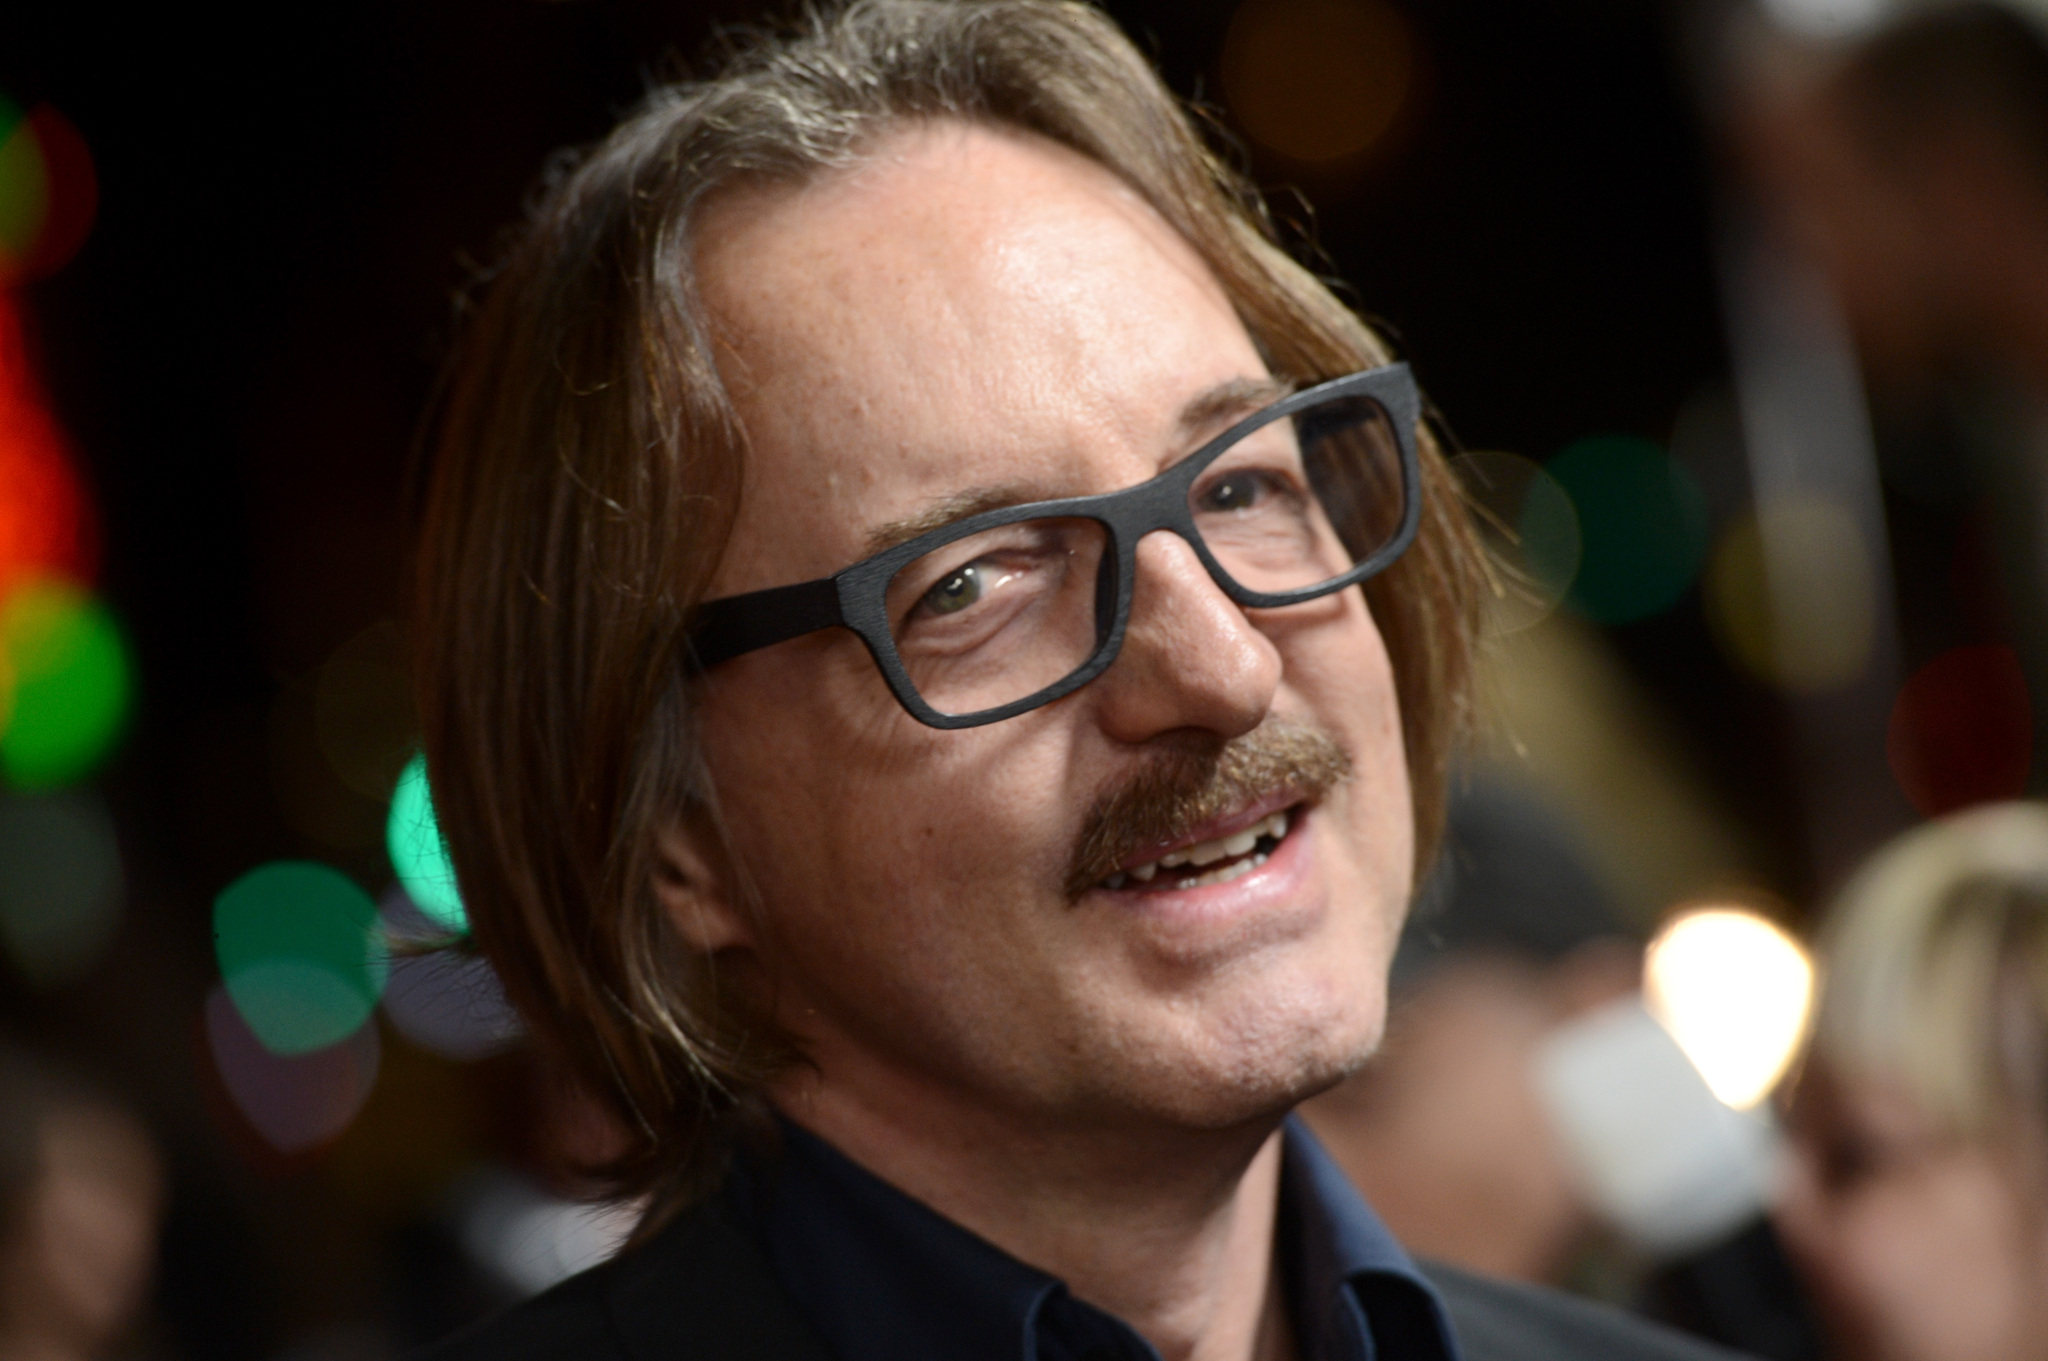 Butch Vig at event of Sound City (2013)